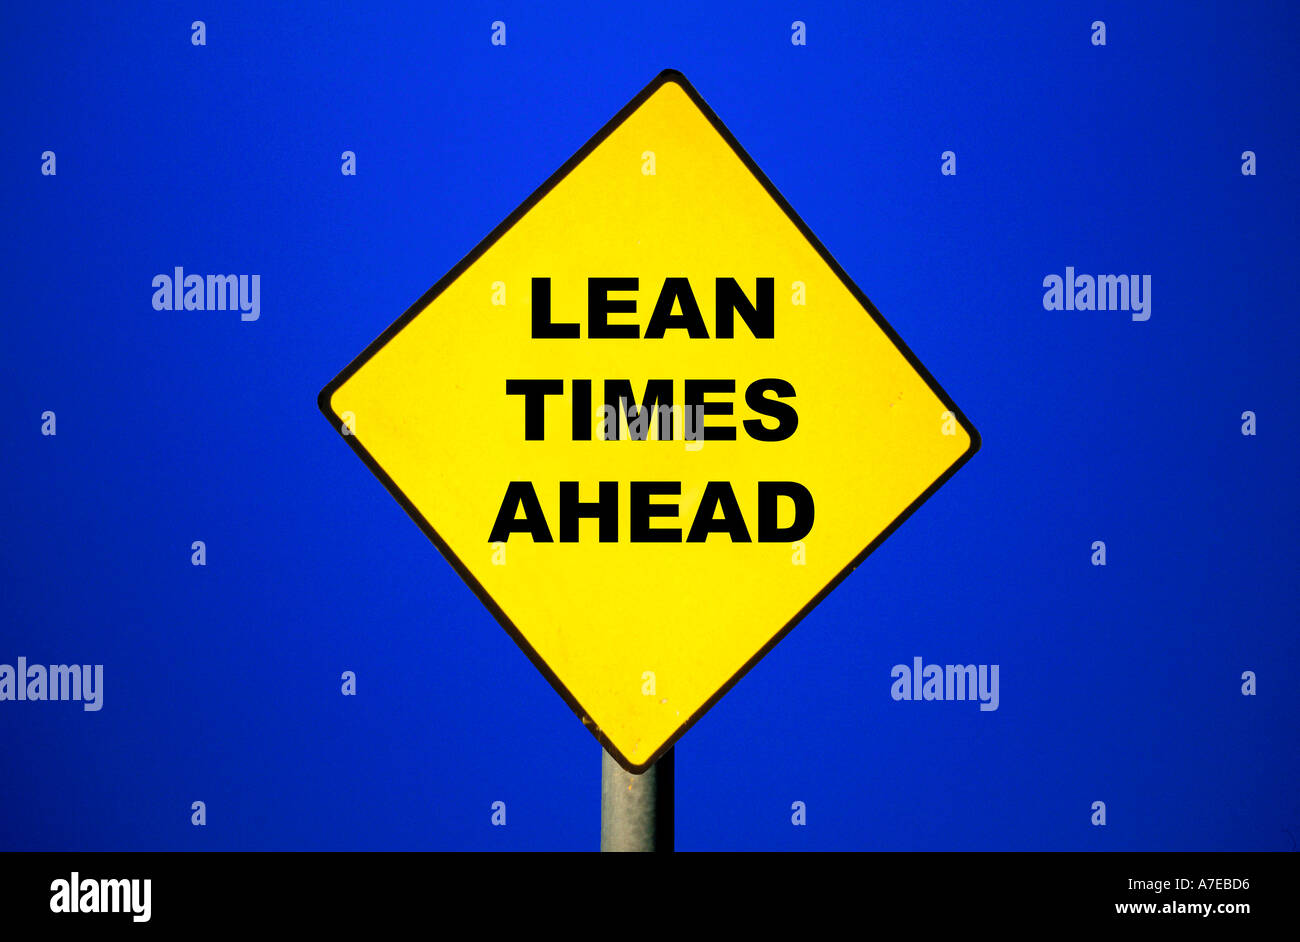 Road Sign with Lean Times Ahead written on it Metaphor for financial problems ahead Stock Photo